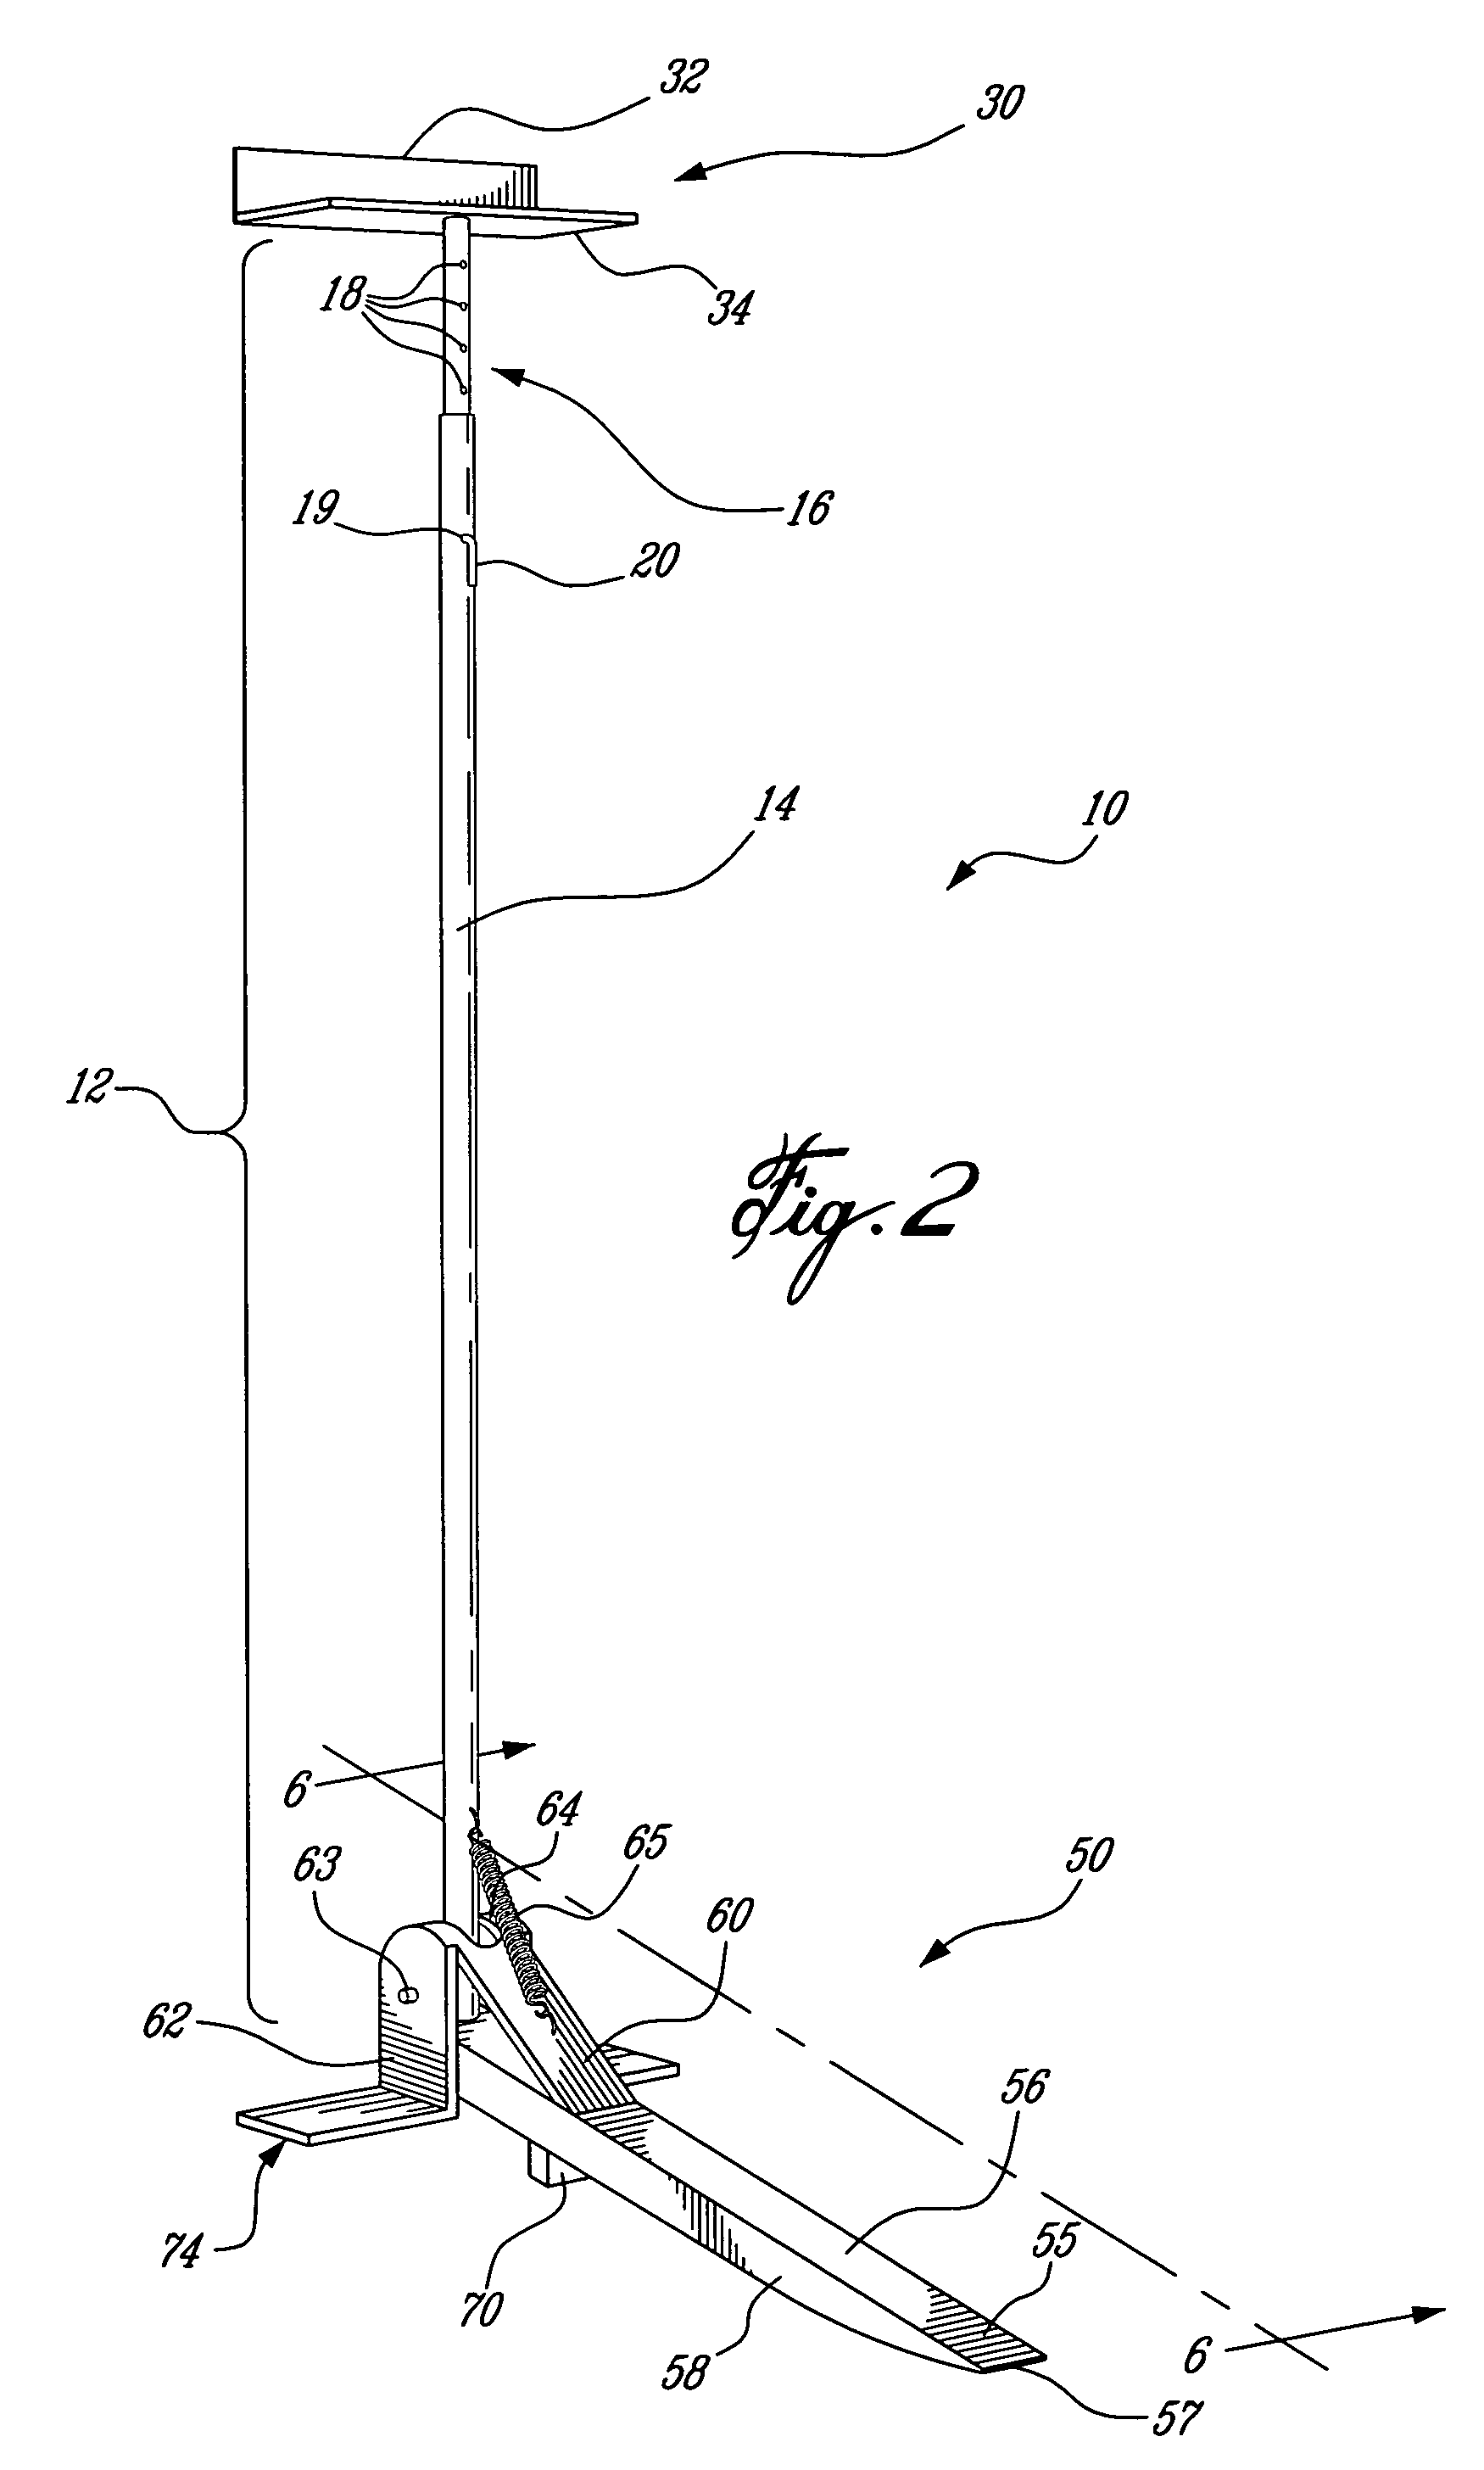 Device for holding and positioning construction materials